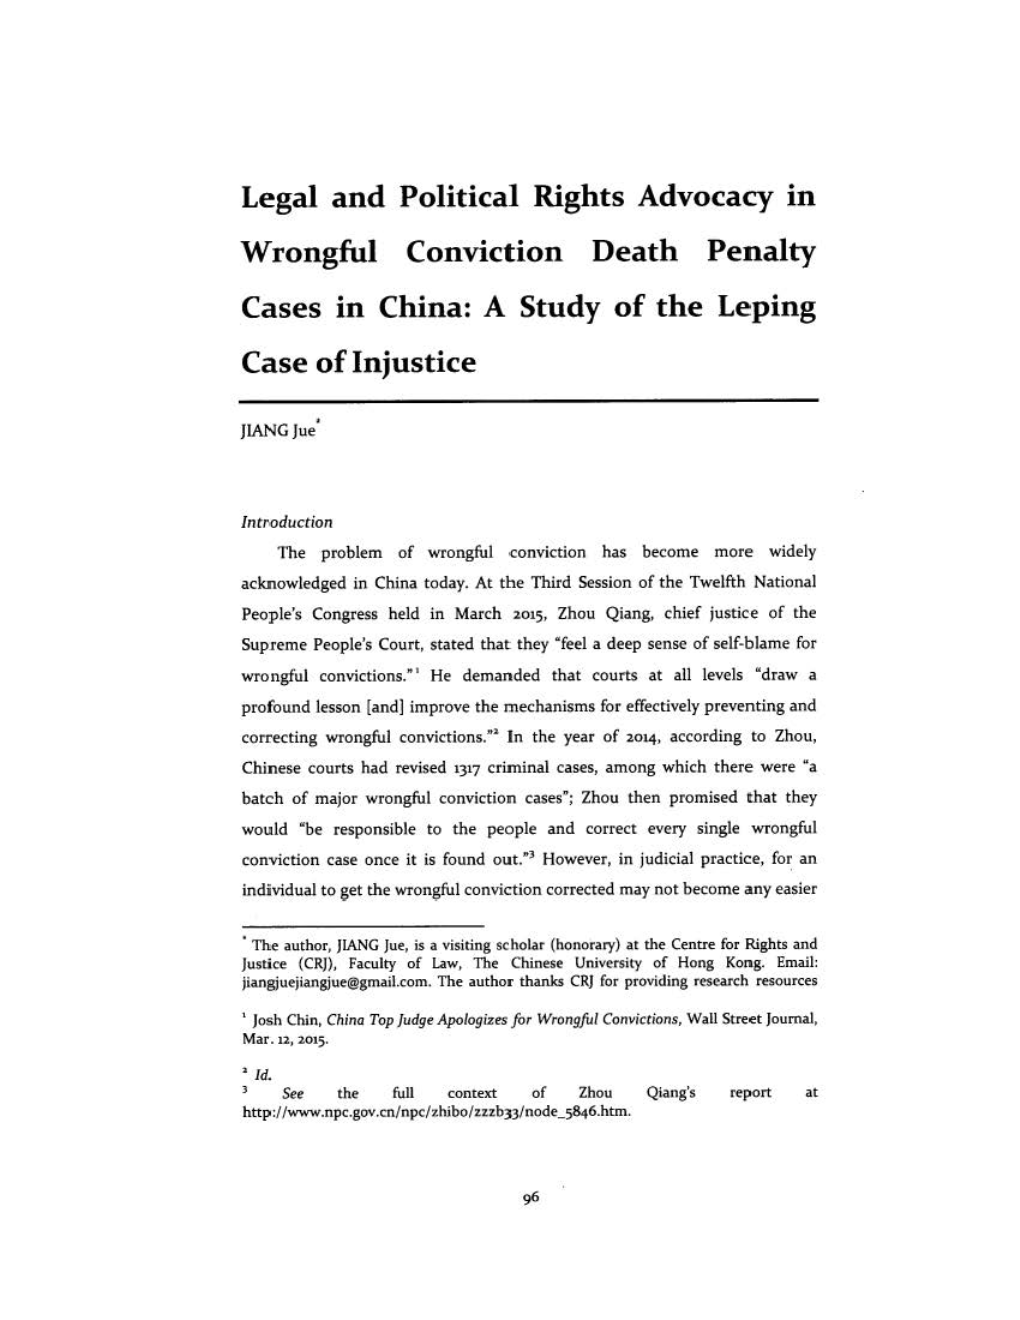 Legal and Political Rights Advocacy in Wrongful Conviction Death Penalty Cases in China: a Study of the Leping Case of Injustice